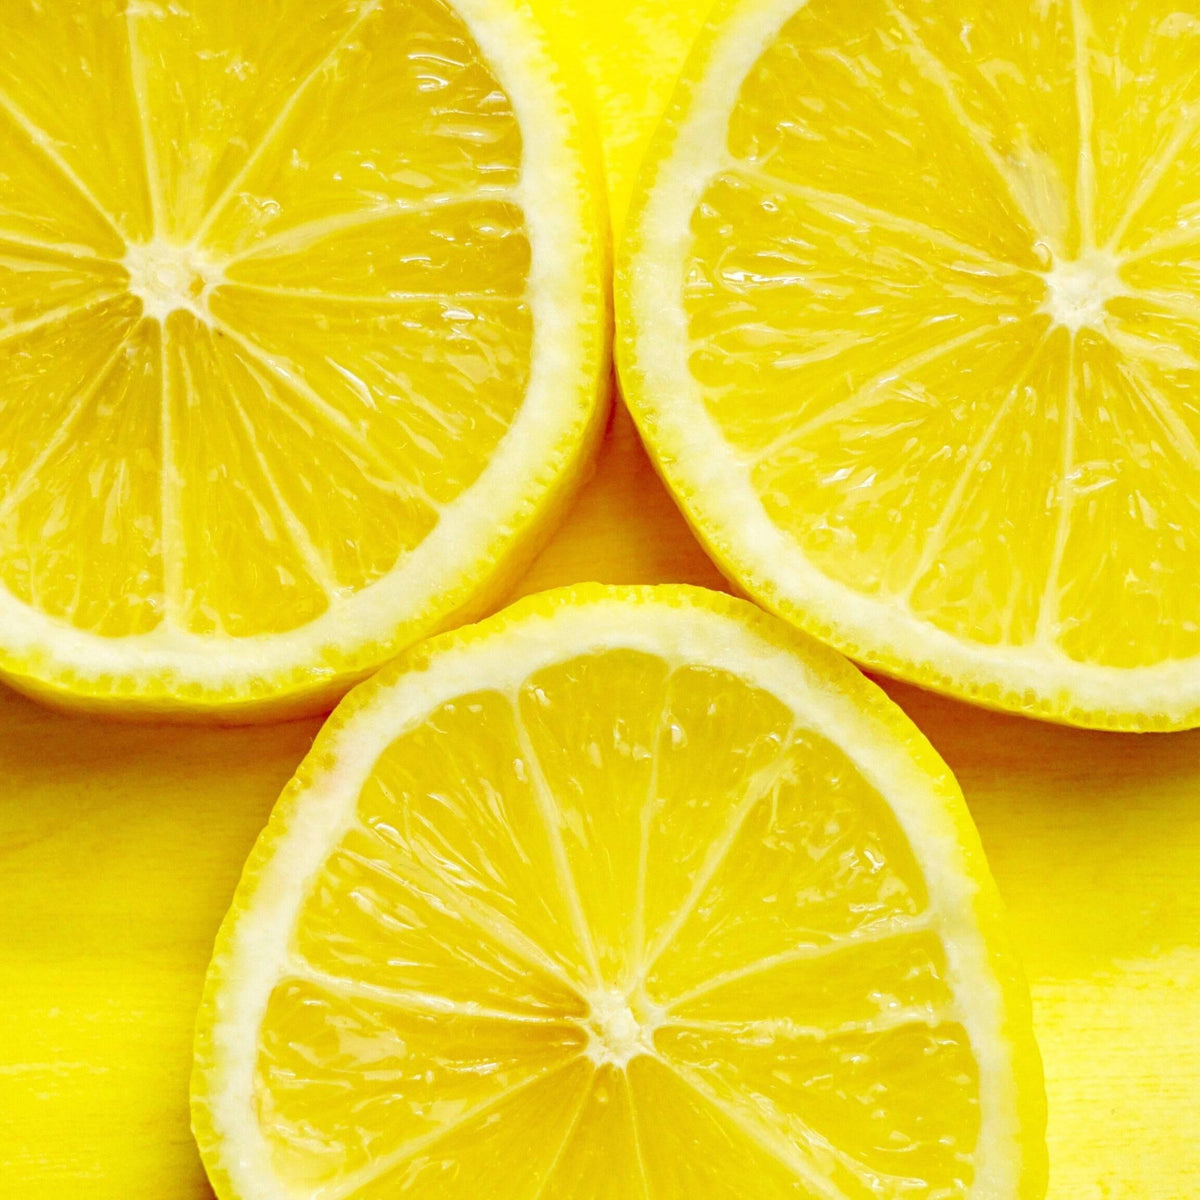 Sherbet Lemon Fragrance Oil - Craftiful Fragrance Oils - Supplies for Wax Melts, Candles, Room Sprays, Reed Diffusers, Bath Bombs, Soaps, Perfumes, Bath Salts and Body Sprays